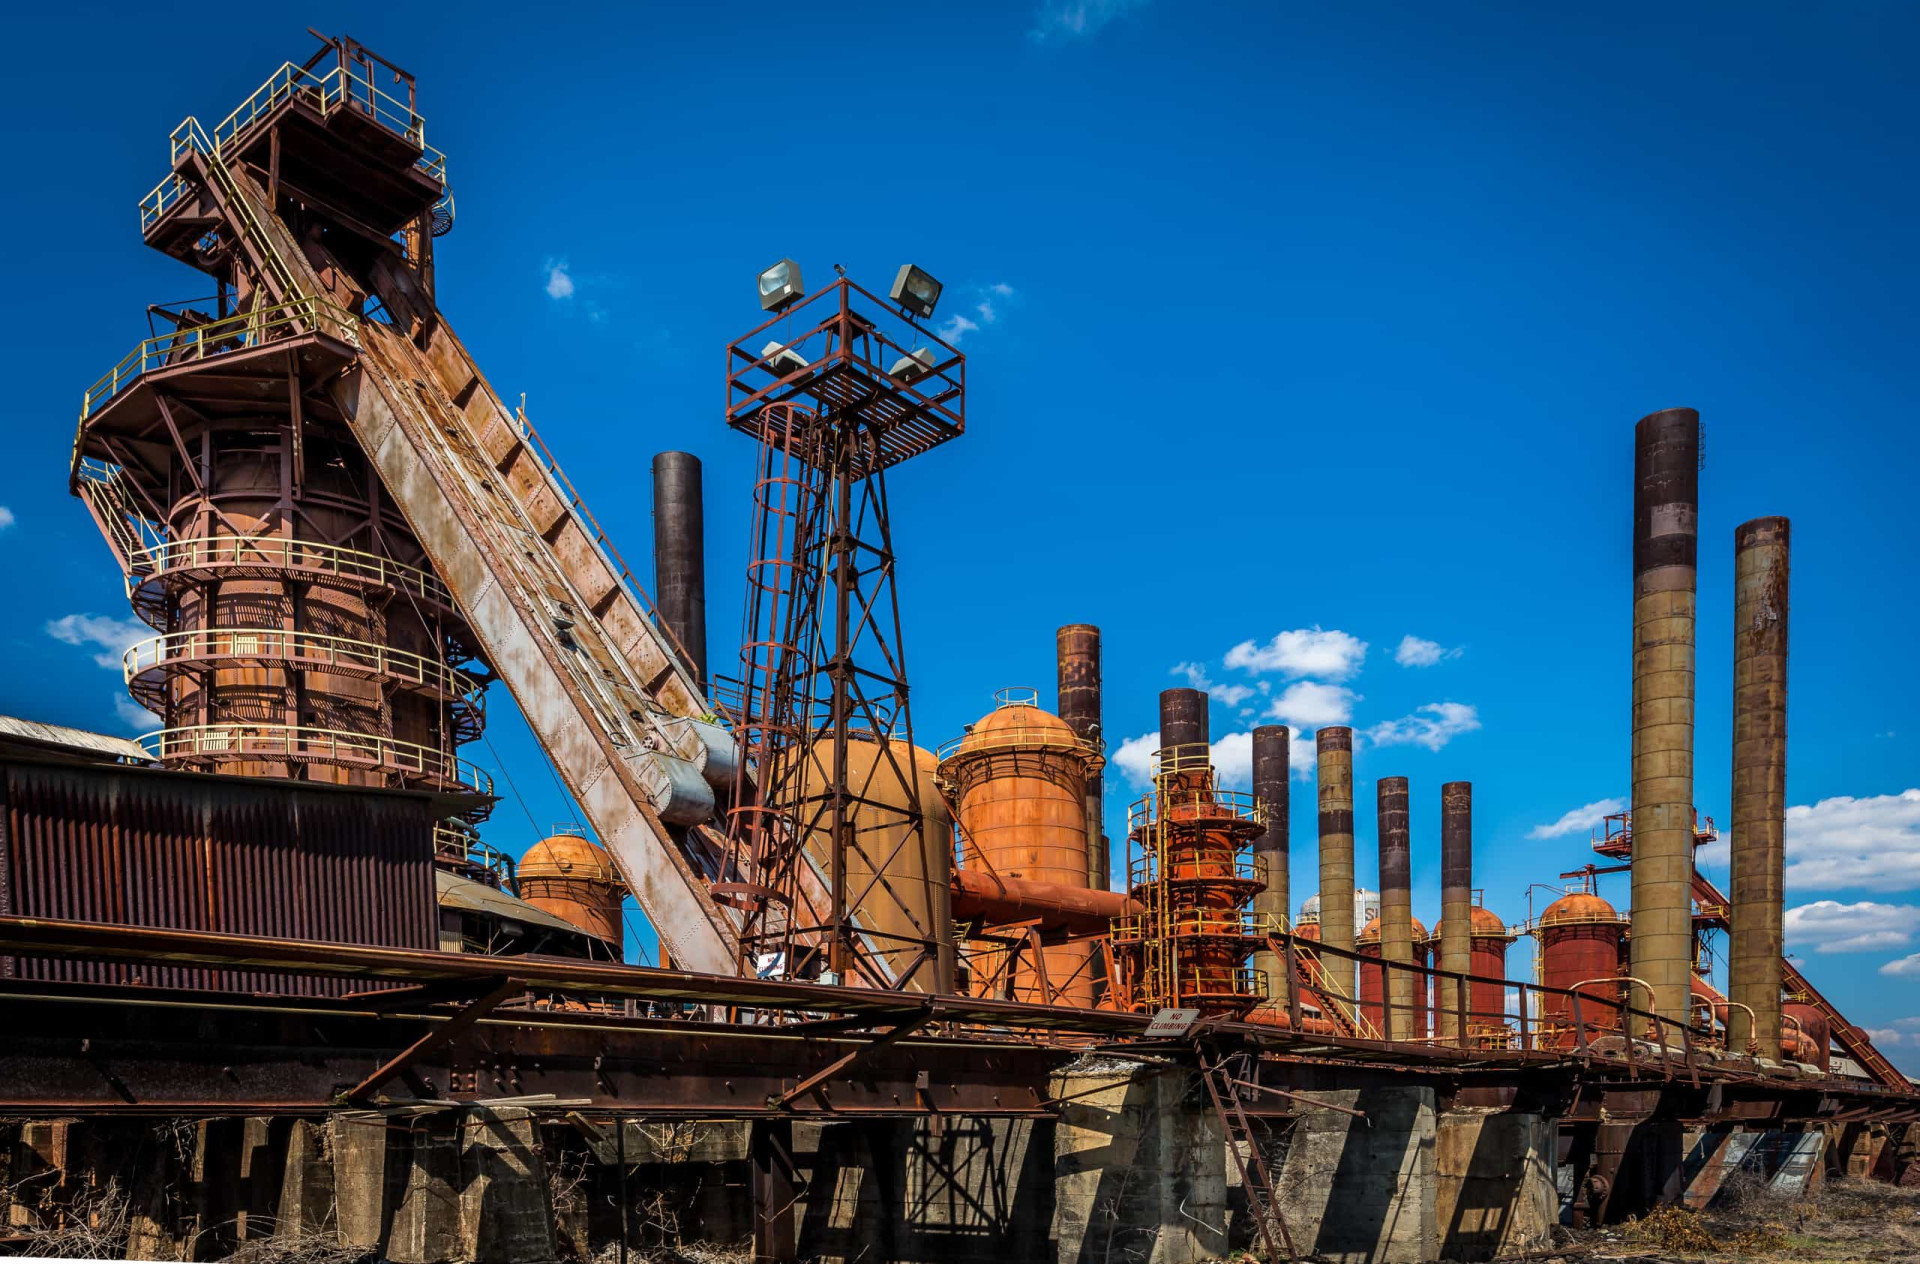 <p>Operating as a pig iron-producing blast furnace from 1882 to 1971, the Sloss Furnaces was one of the first industrial sites in the US to be preserved and restored for public use.</p><p>You may also like:<a href="https://www.starsinsider.com/n/380212?utm_source=msn.com&utm_medium=display&utm_campaign=referral_description&utm_content=198095v22en-en"> The most epic celebrity clapbacks ever</a></p>